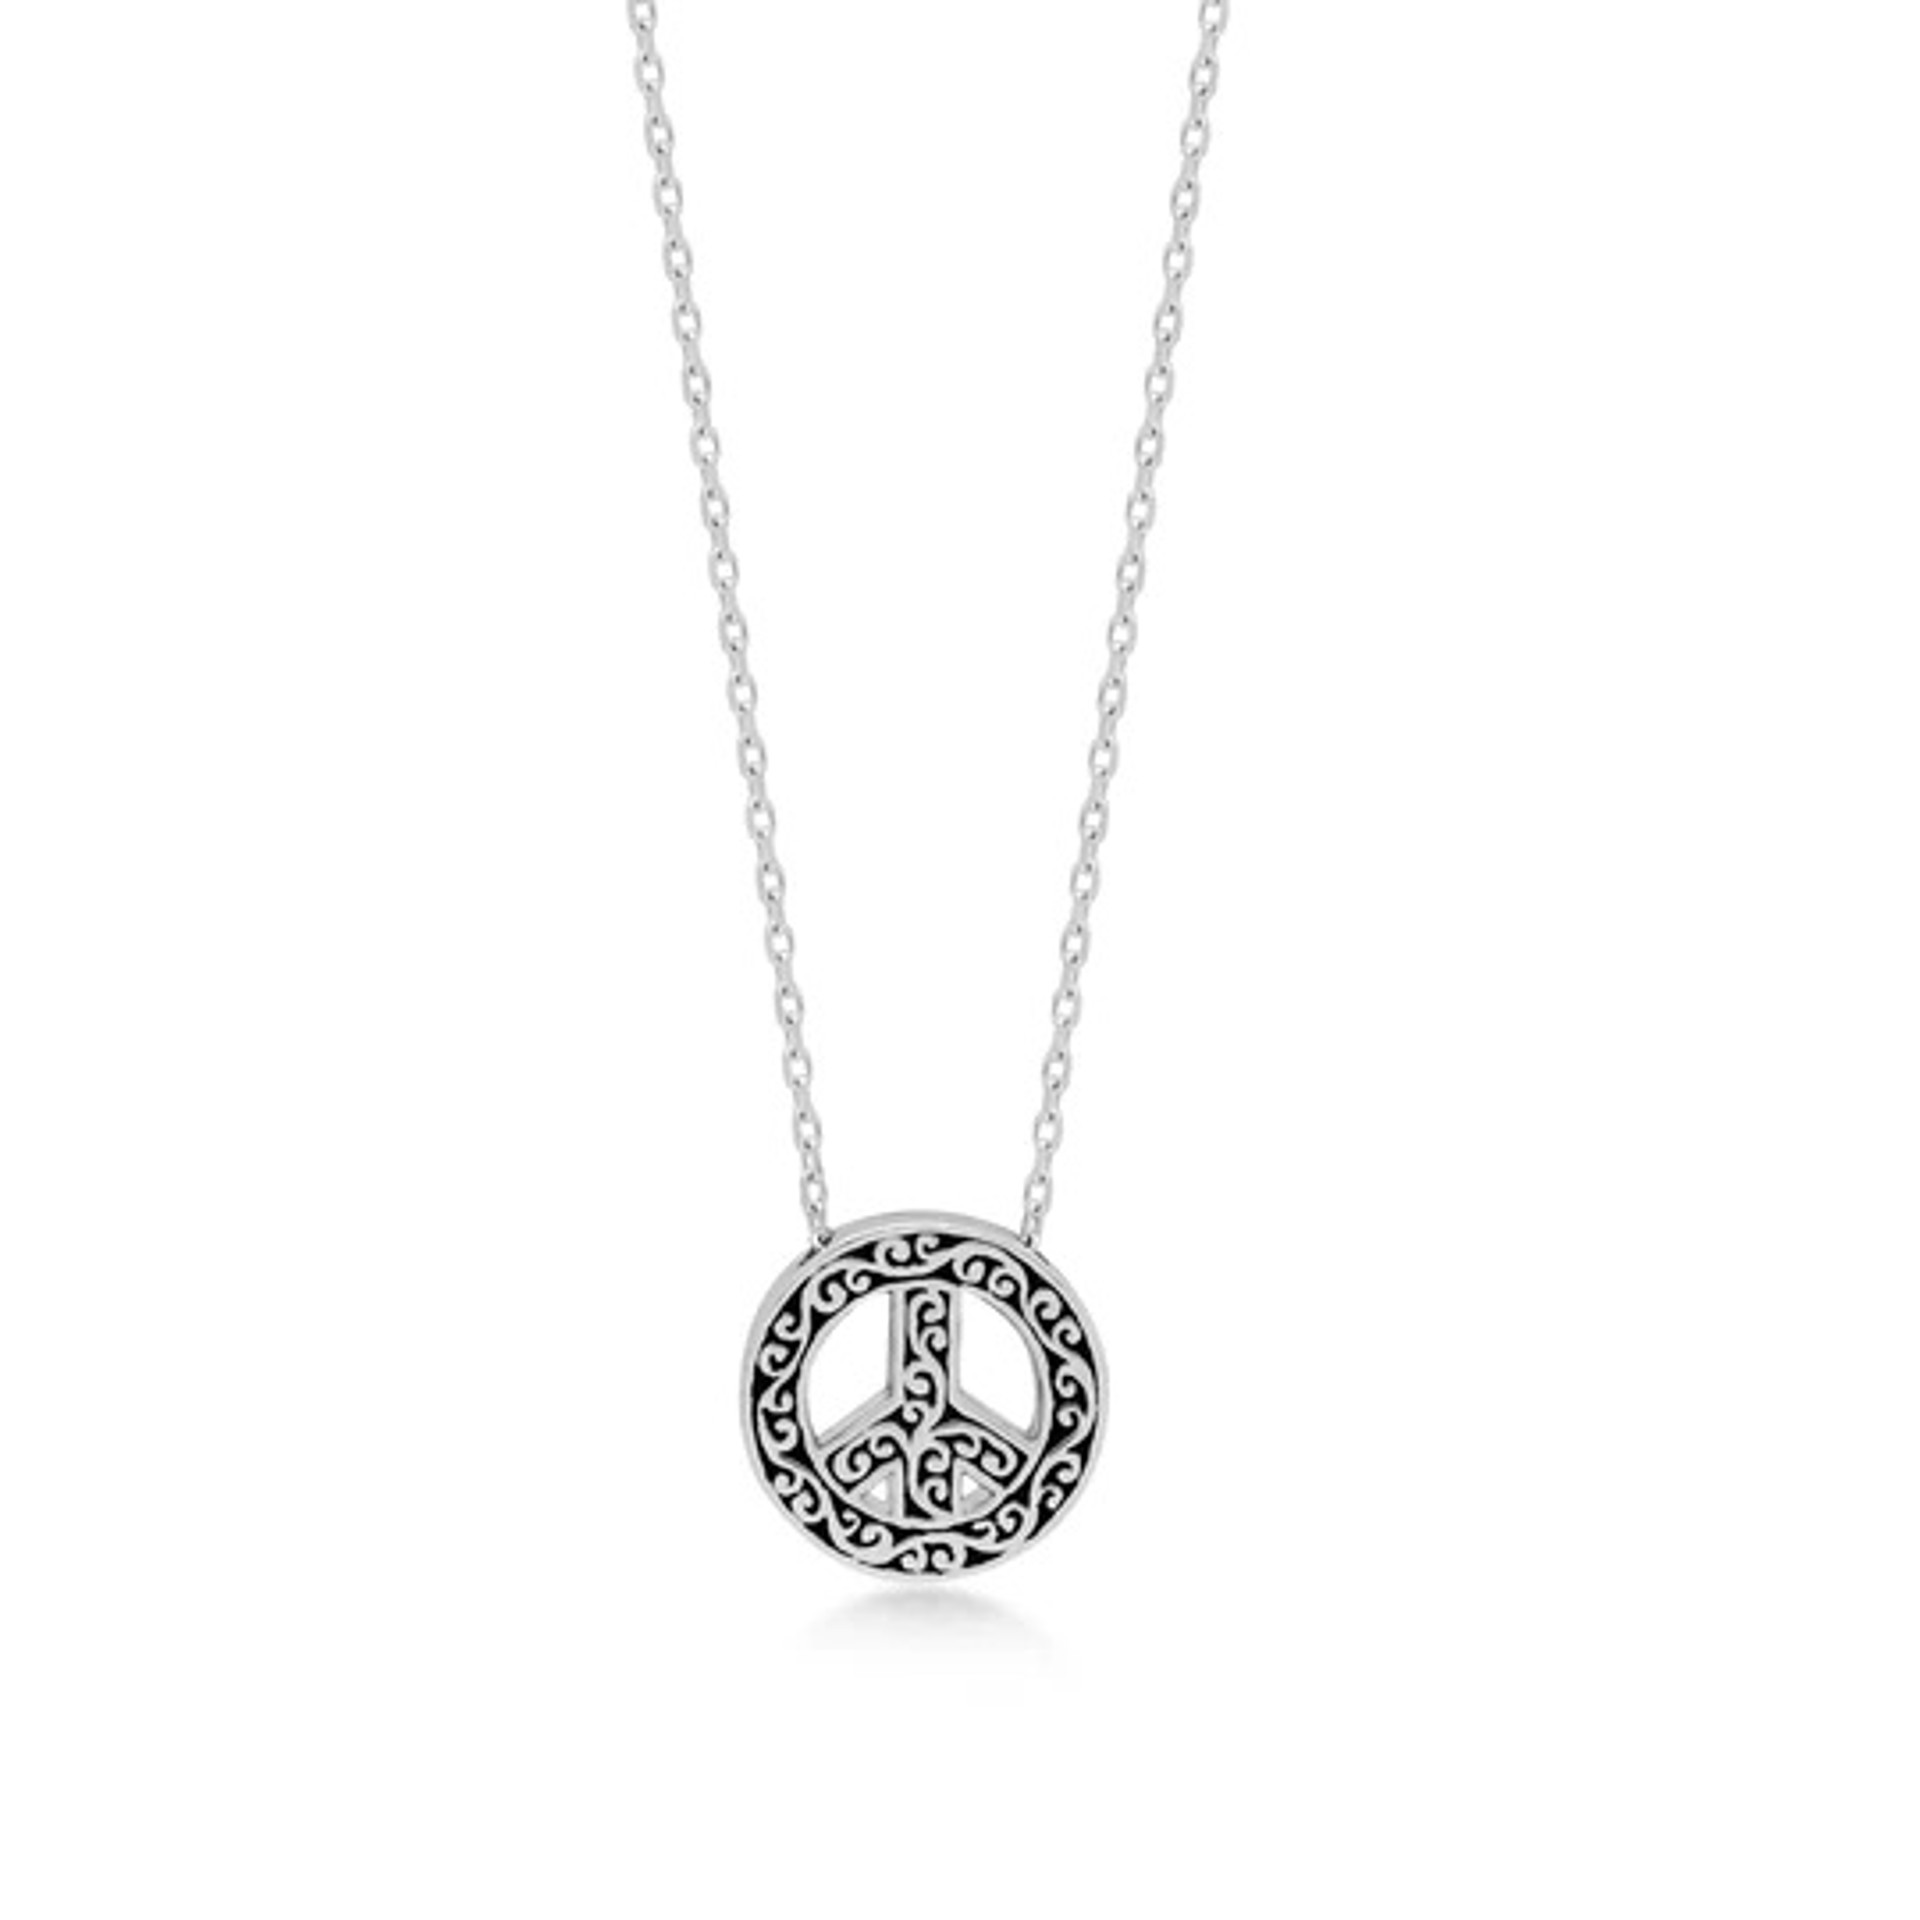 1092 Silver Delicate Peace Sign Pendant Necklace in 18" Adjustable Chain. Pendant Size 12 mm (SO) by Lois Hill